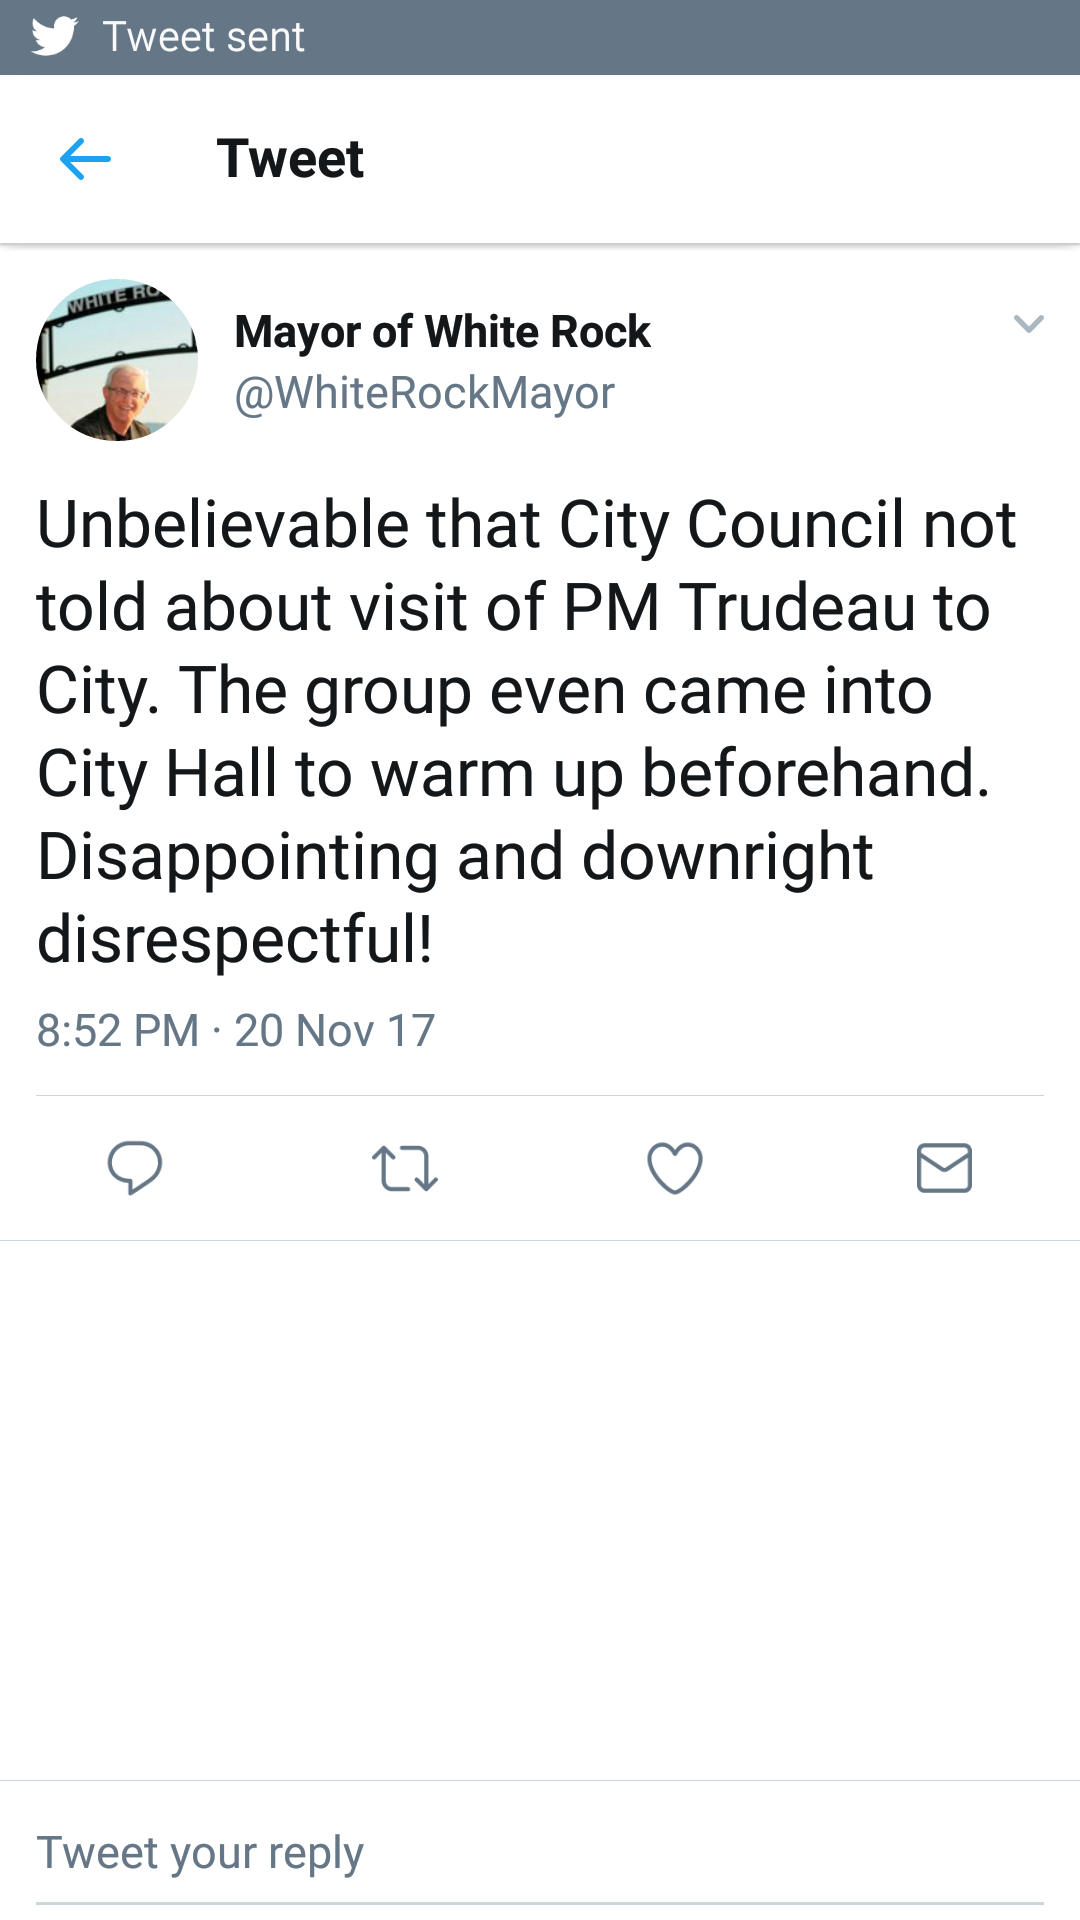 What was the Mayor of White Rock thinking?